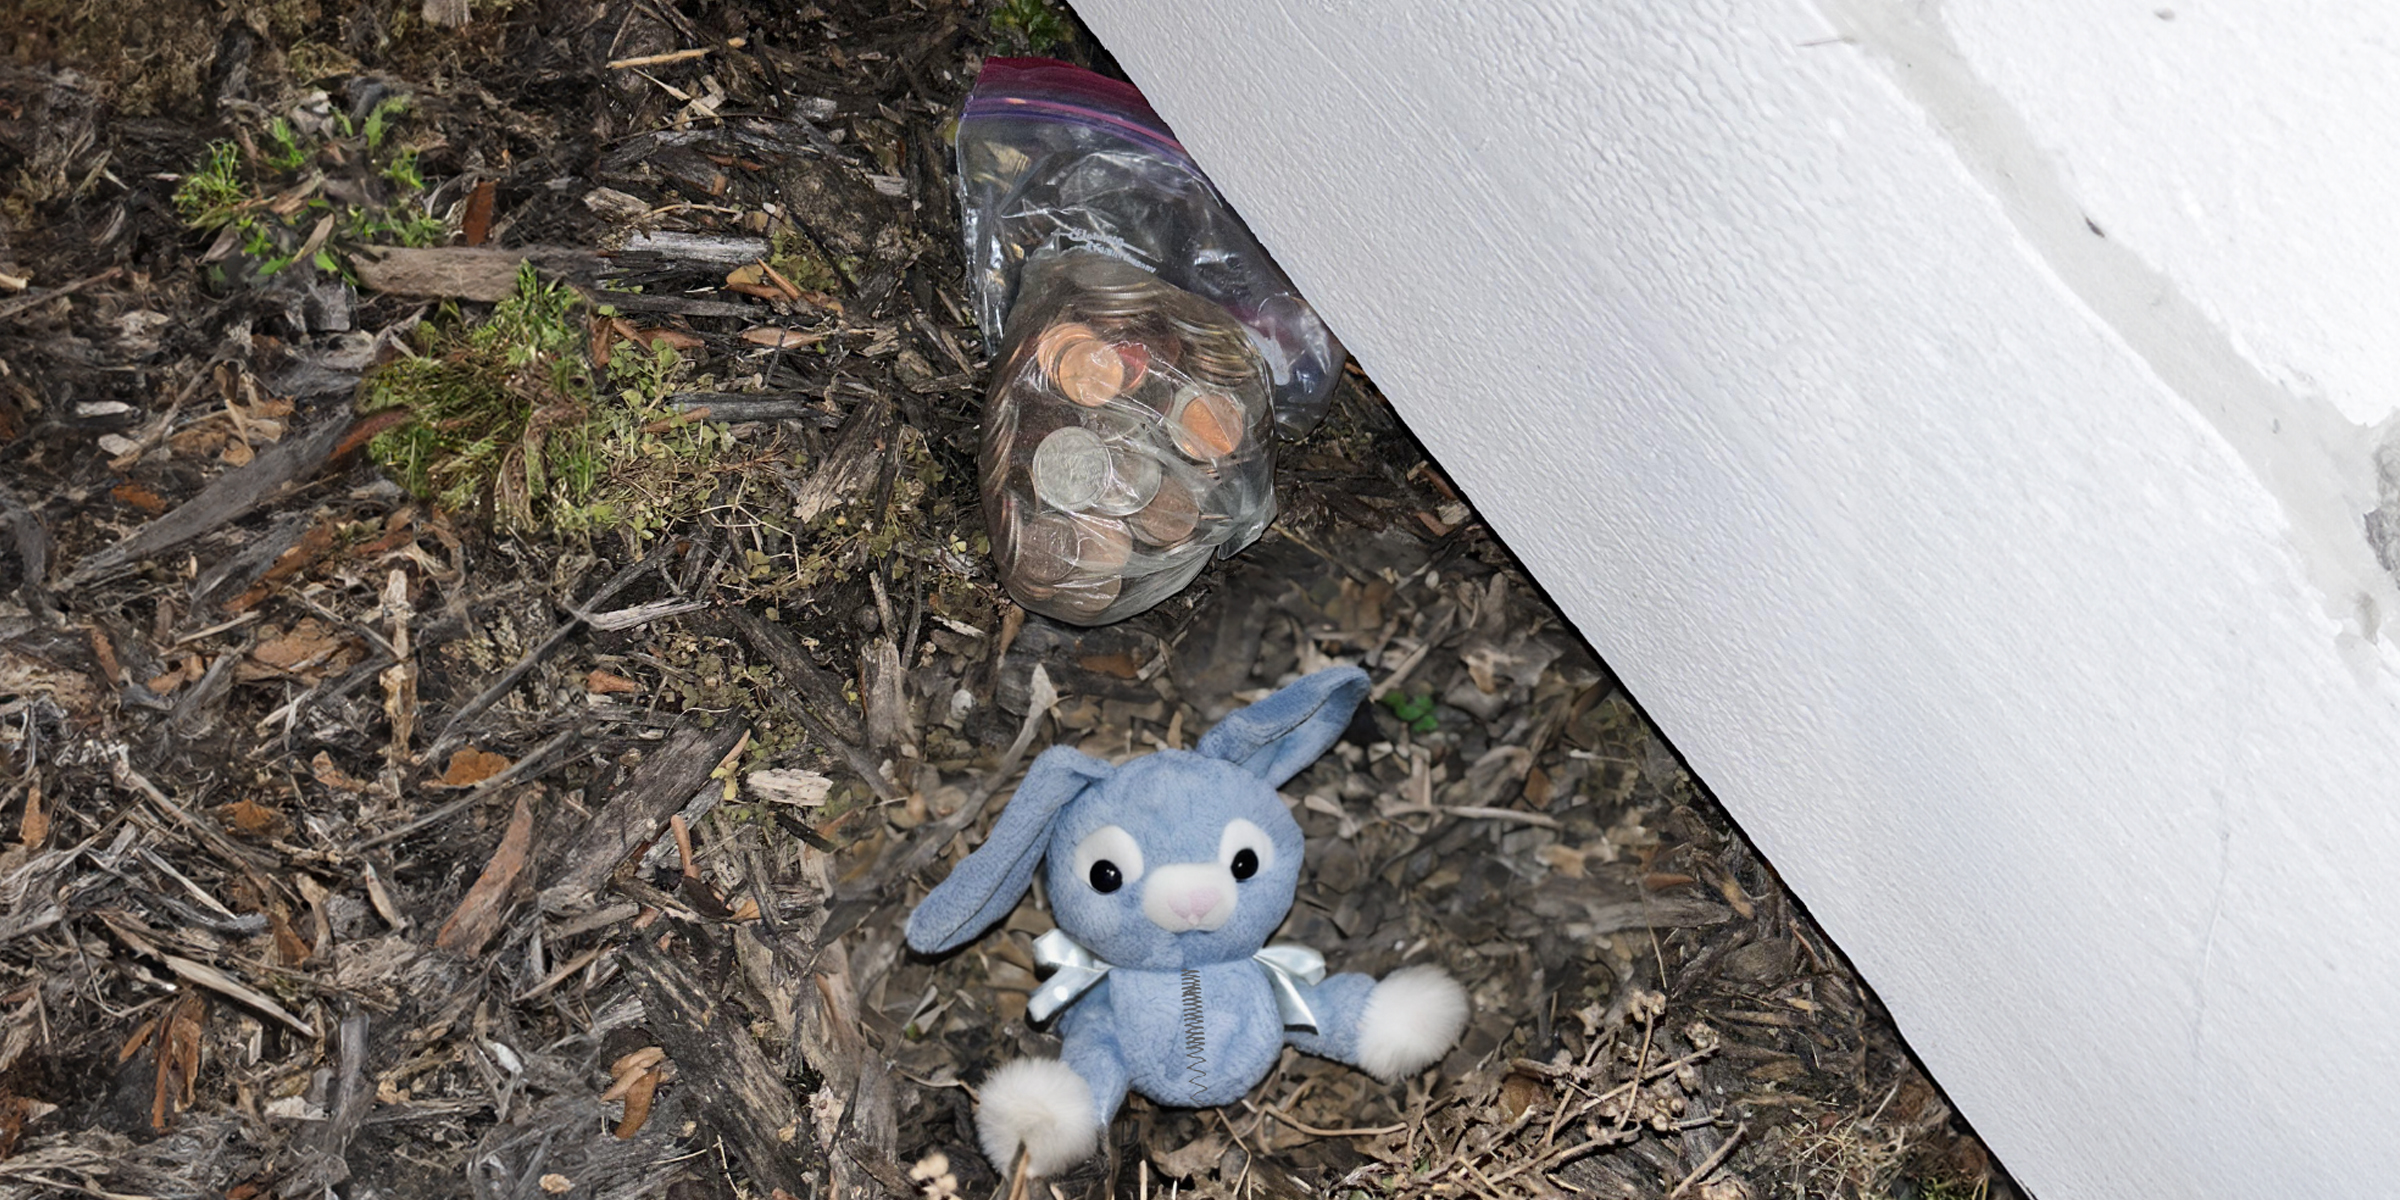 A bag of coins and a plush bunny lying under a fence | Source: Amomama